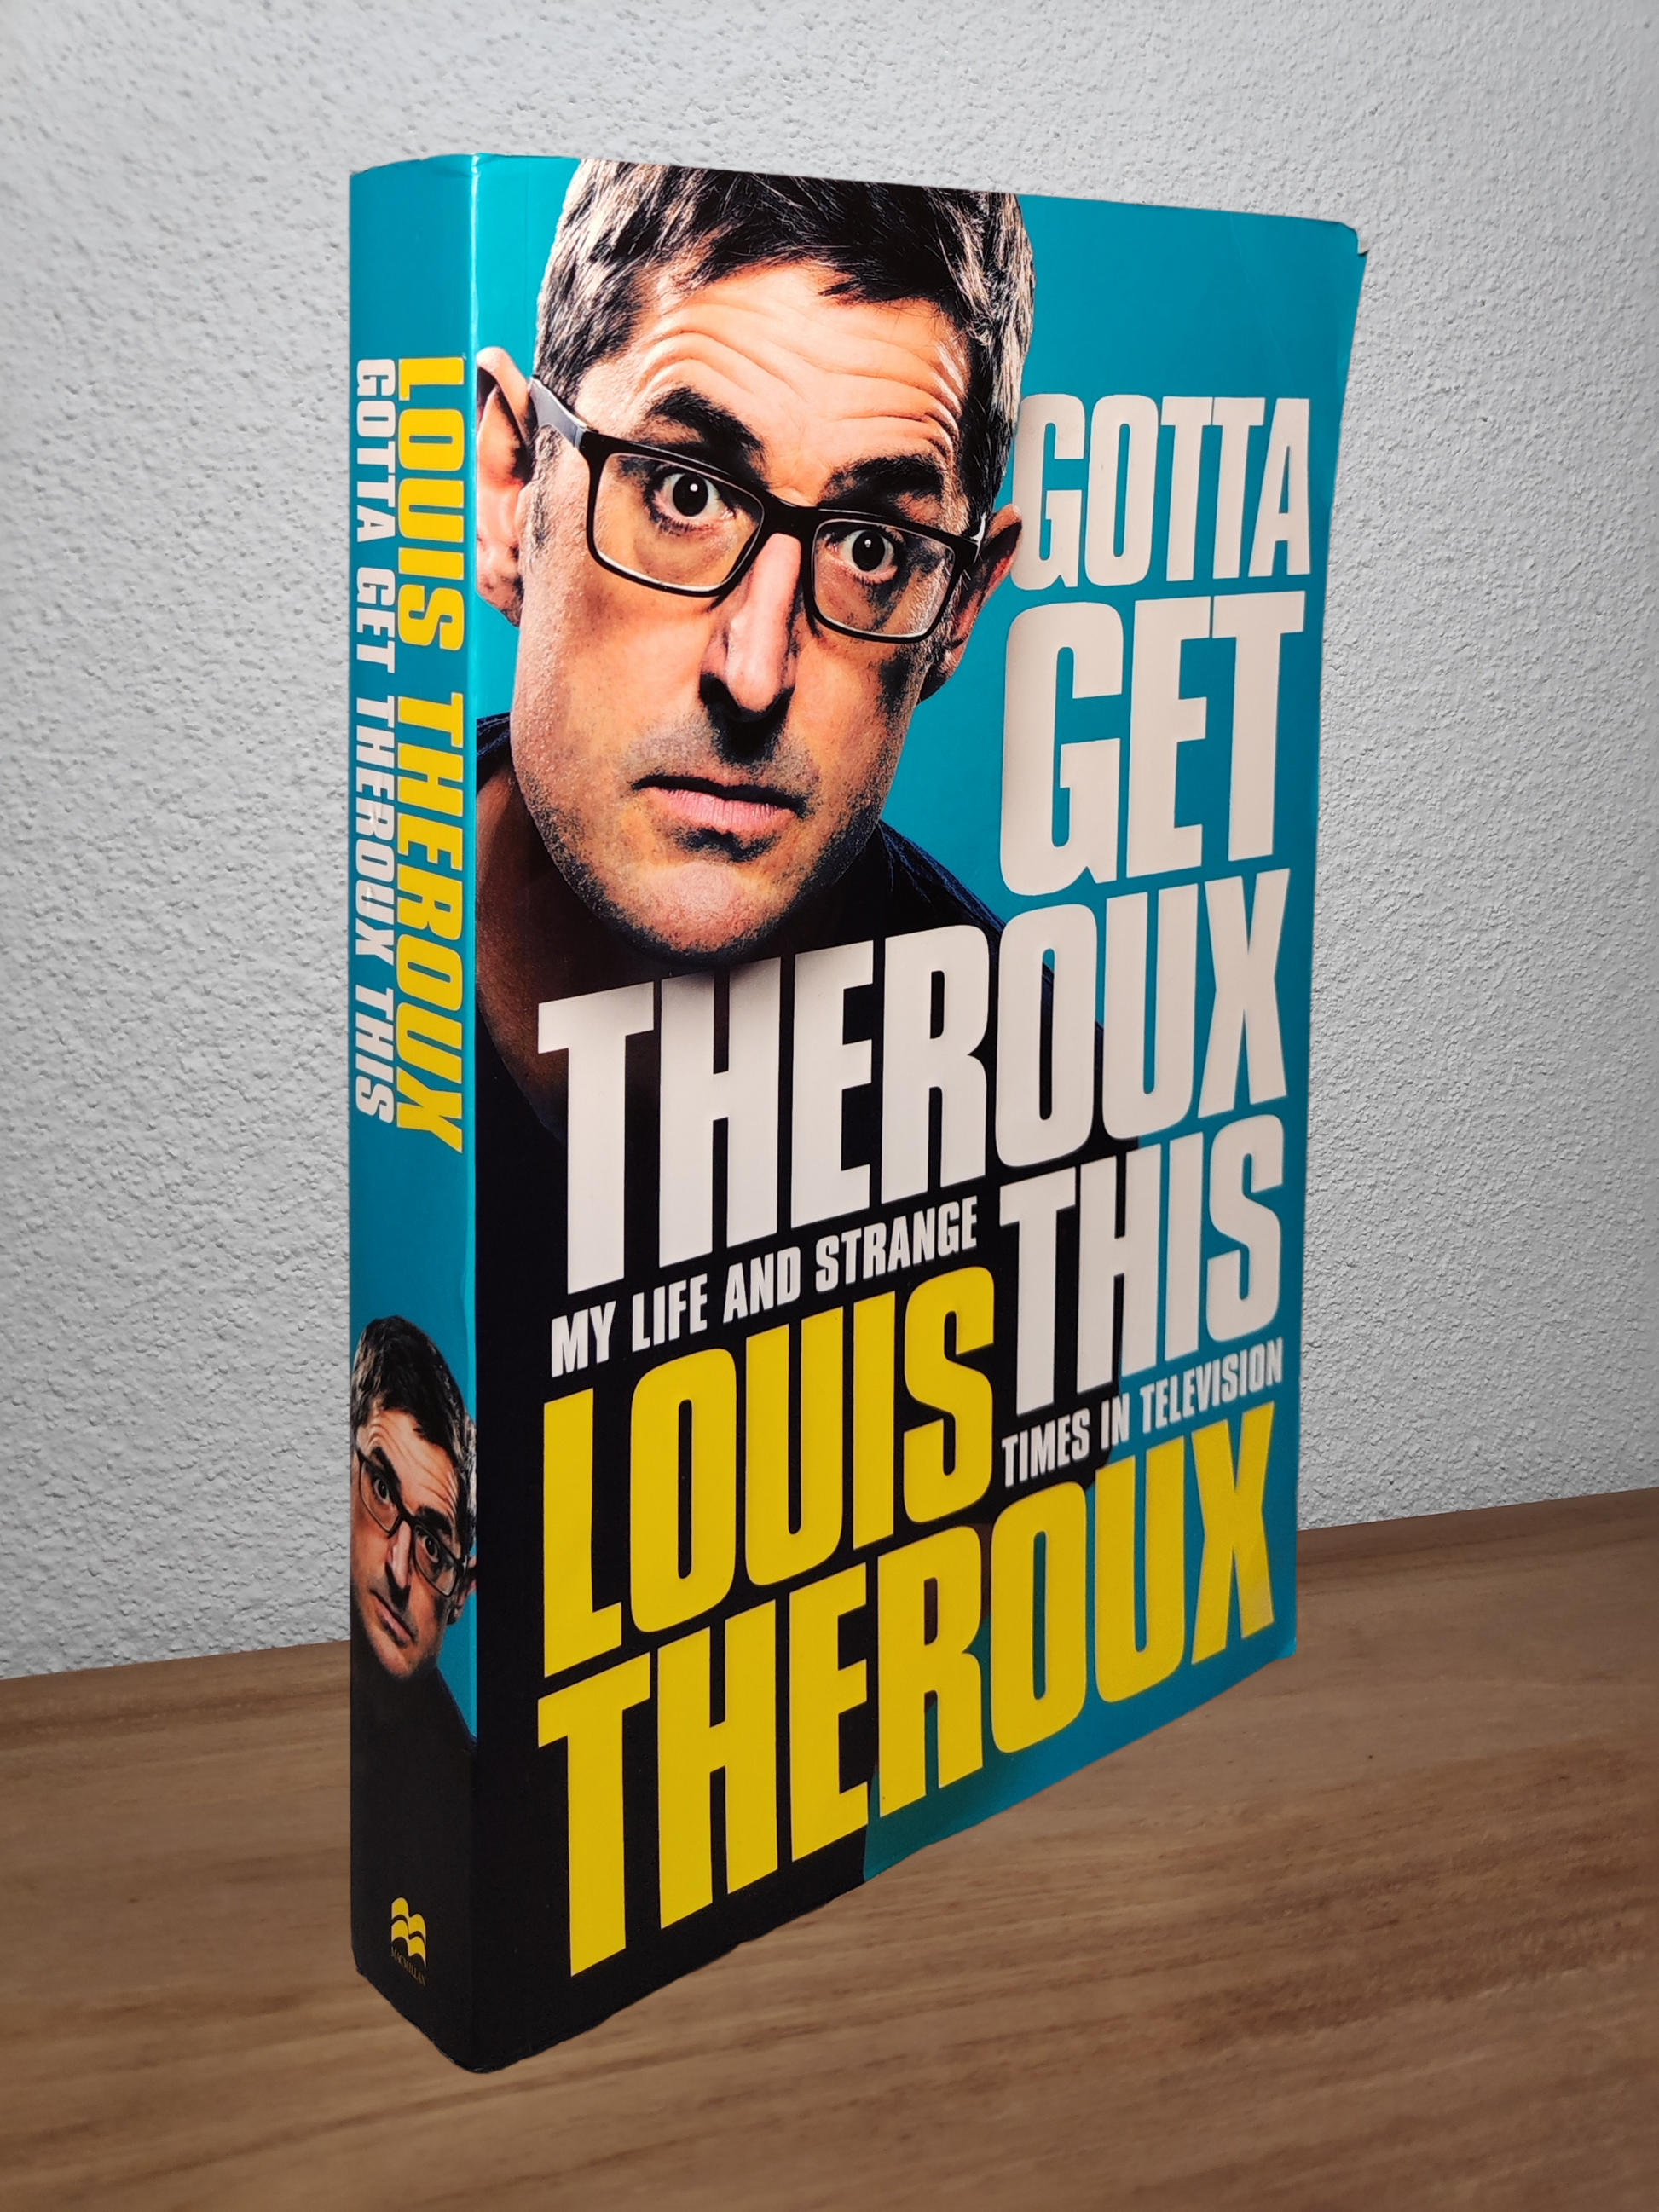 Gotta Get Theroux This - Louis Theroux - Second-hand english book to deliver in Zurich & Switzerland